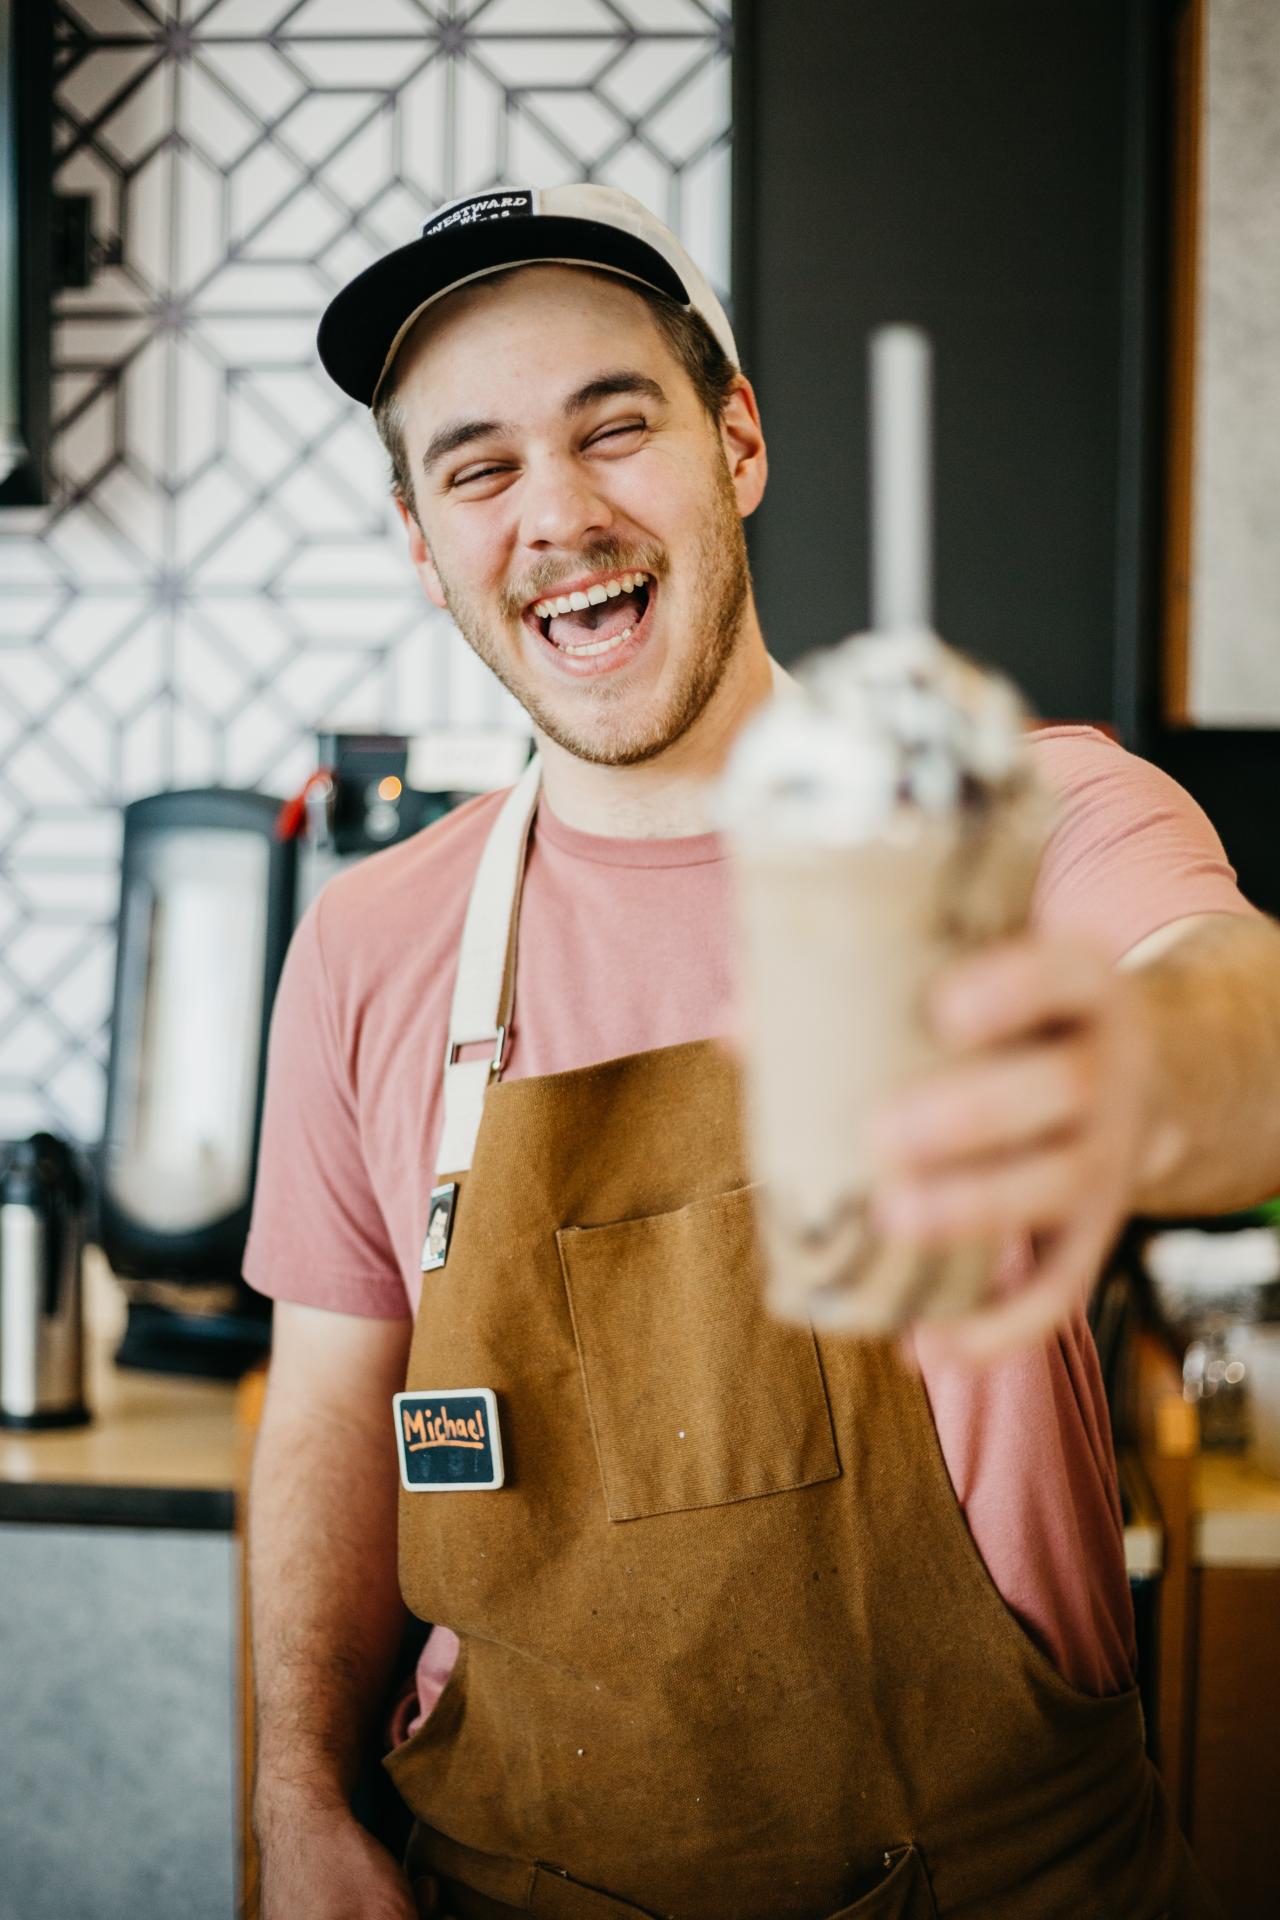 A food working holding a brown drink with whipped cream and chocolate towards the camera. The worker is smiling and wearing a brown apron, pink t-shirt, and a hat.